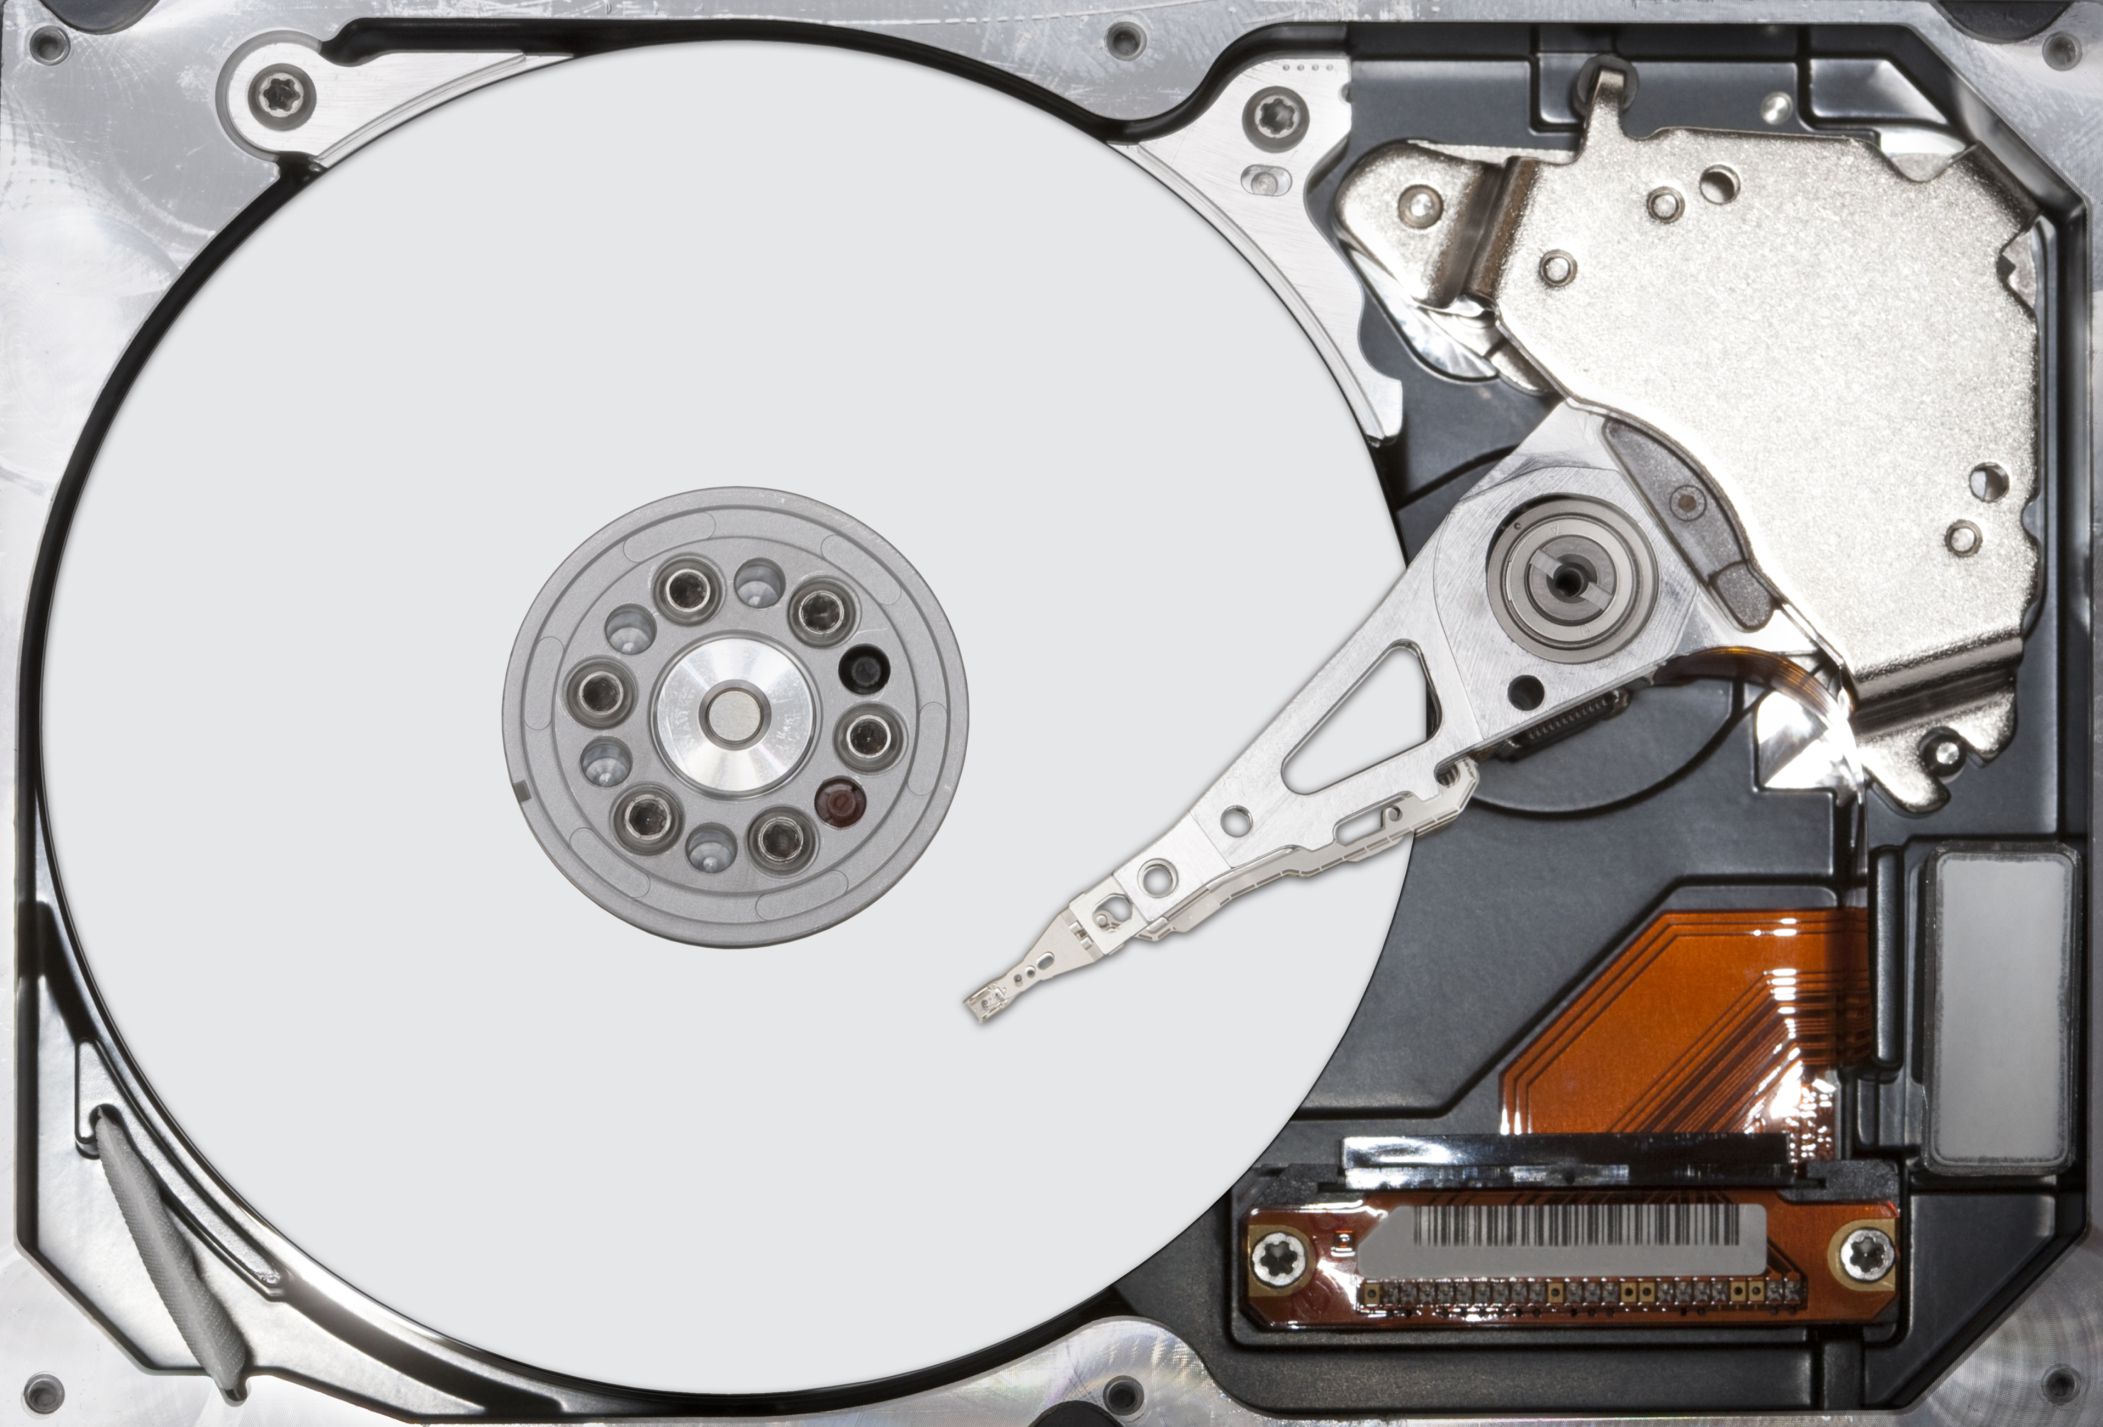 How to Wipe a Hard Drive (Permanently Erase Everything)